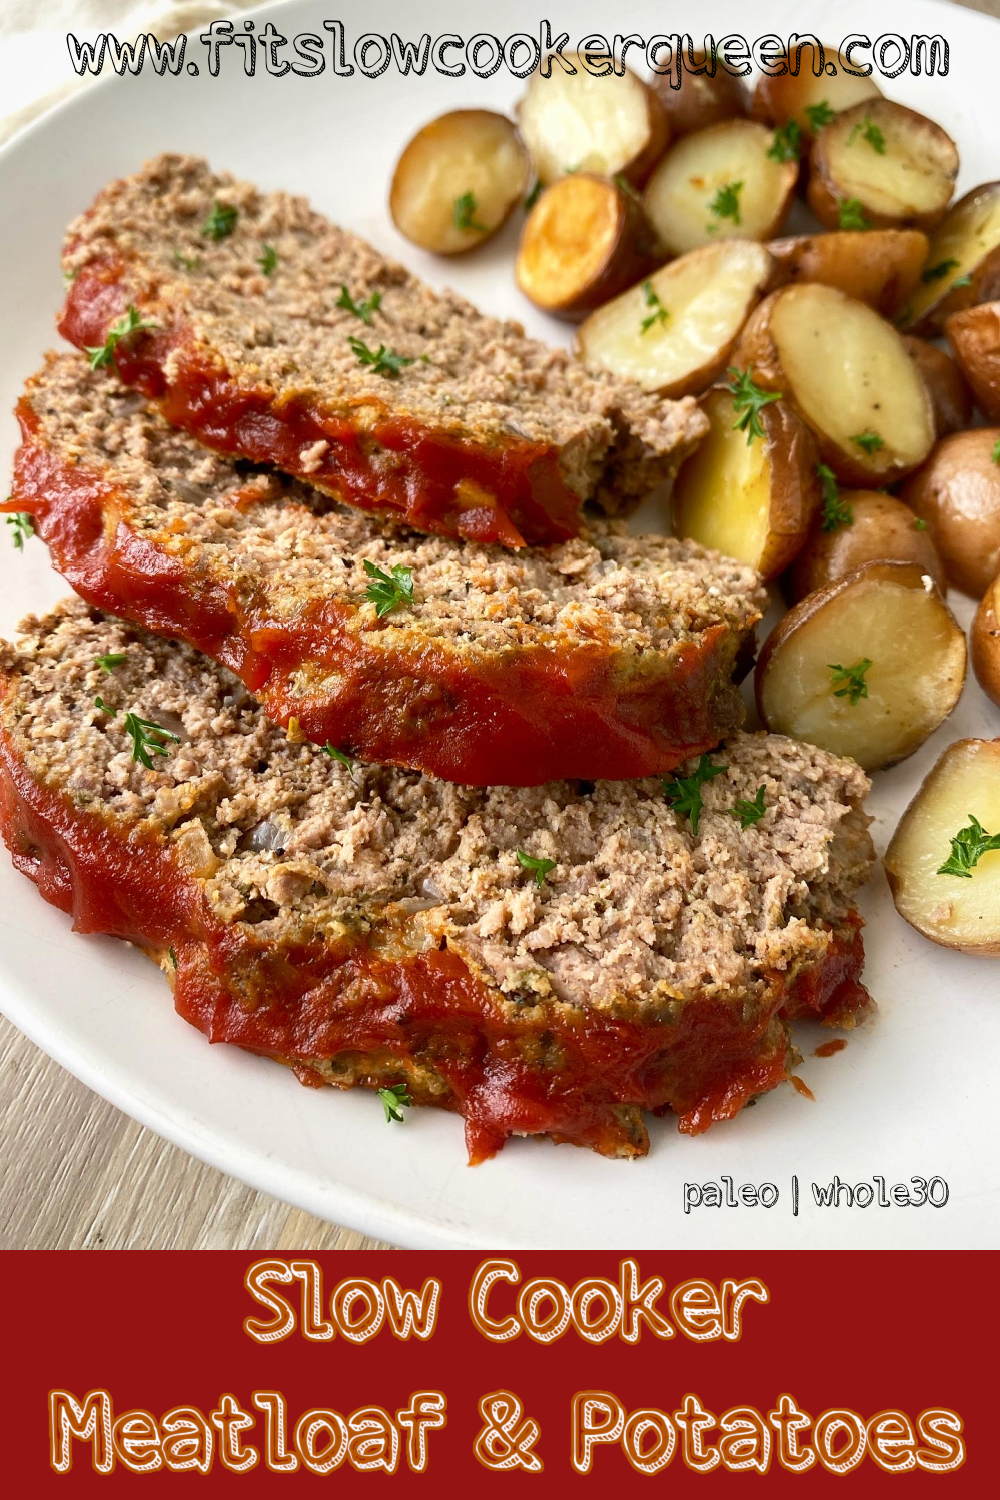 Slow Cooker Meatloaf & Potatoes (Paleo,Whole30) 